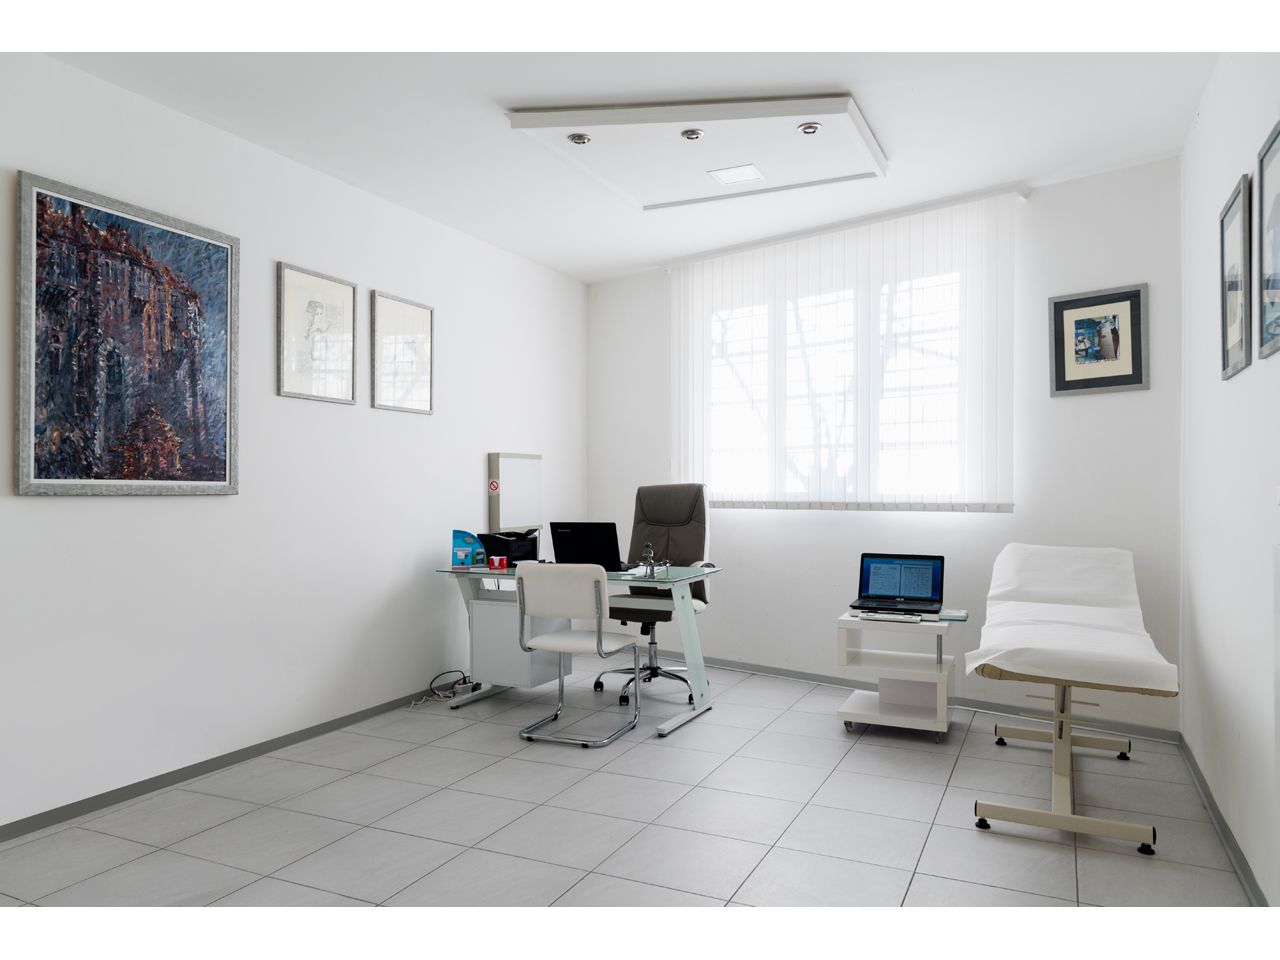 PAIN AND PHYSICAL THERAPY CENTER ANALGESIS Physical medicine Belgrade - Photo 4